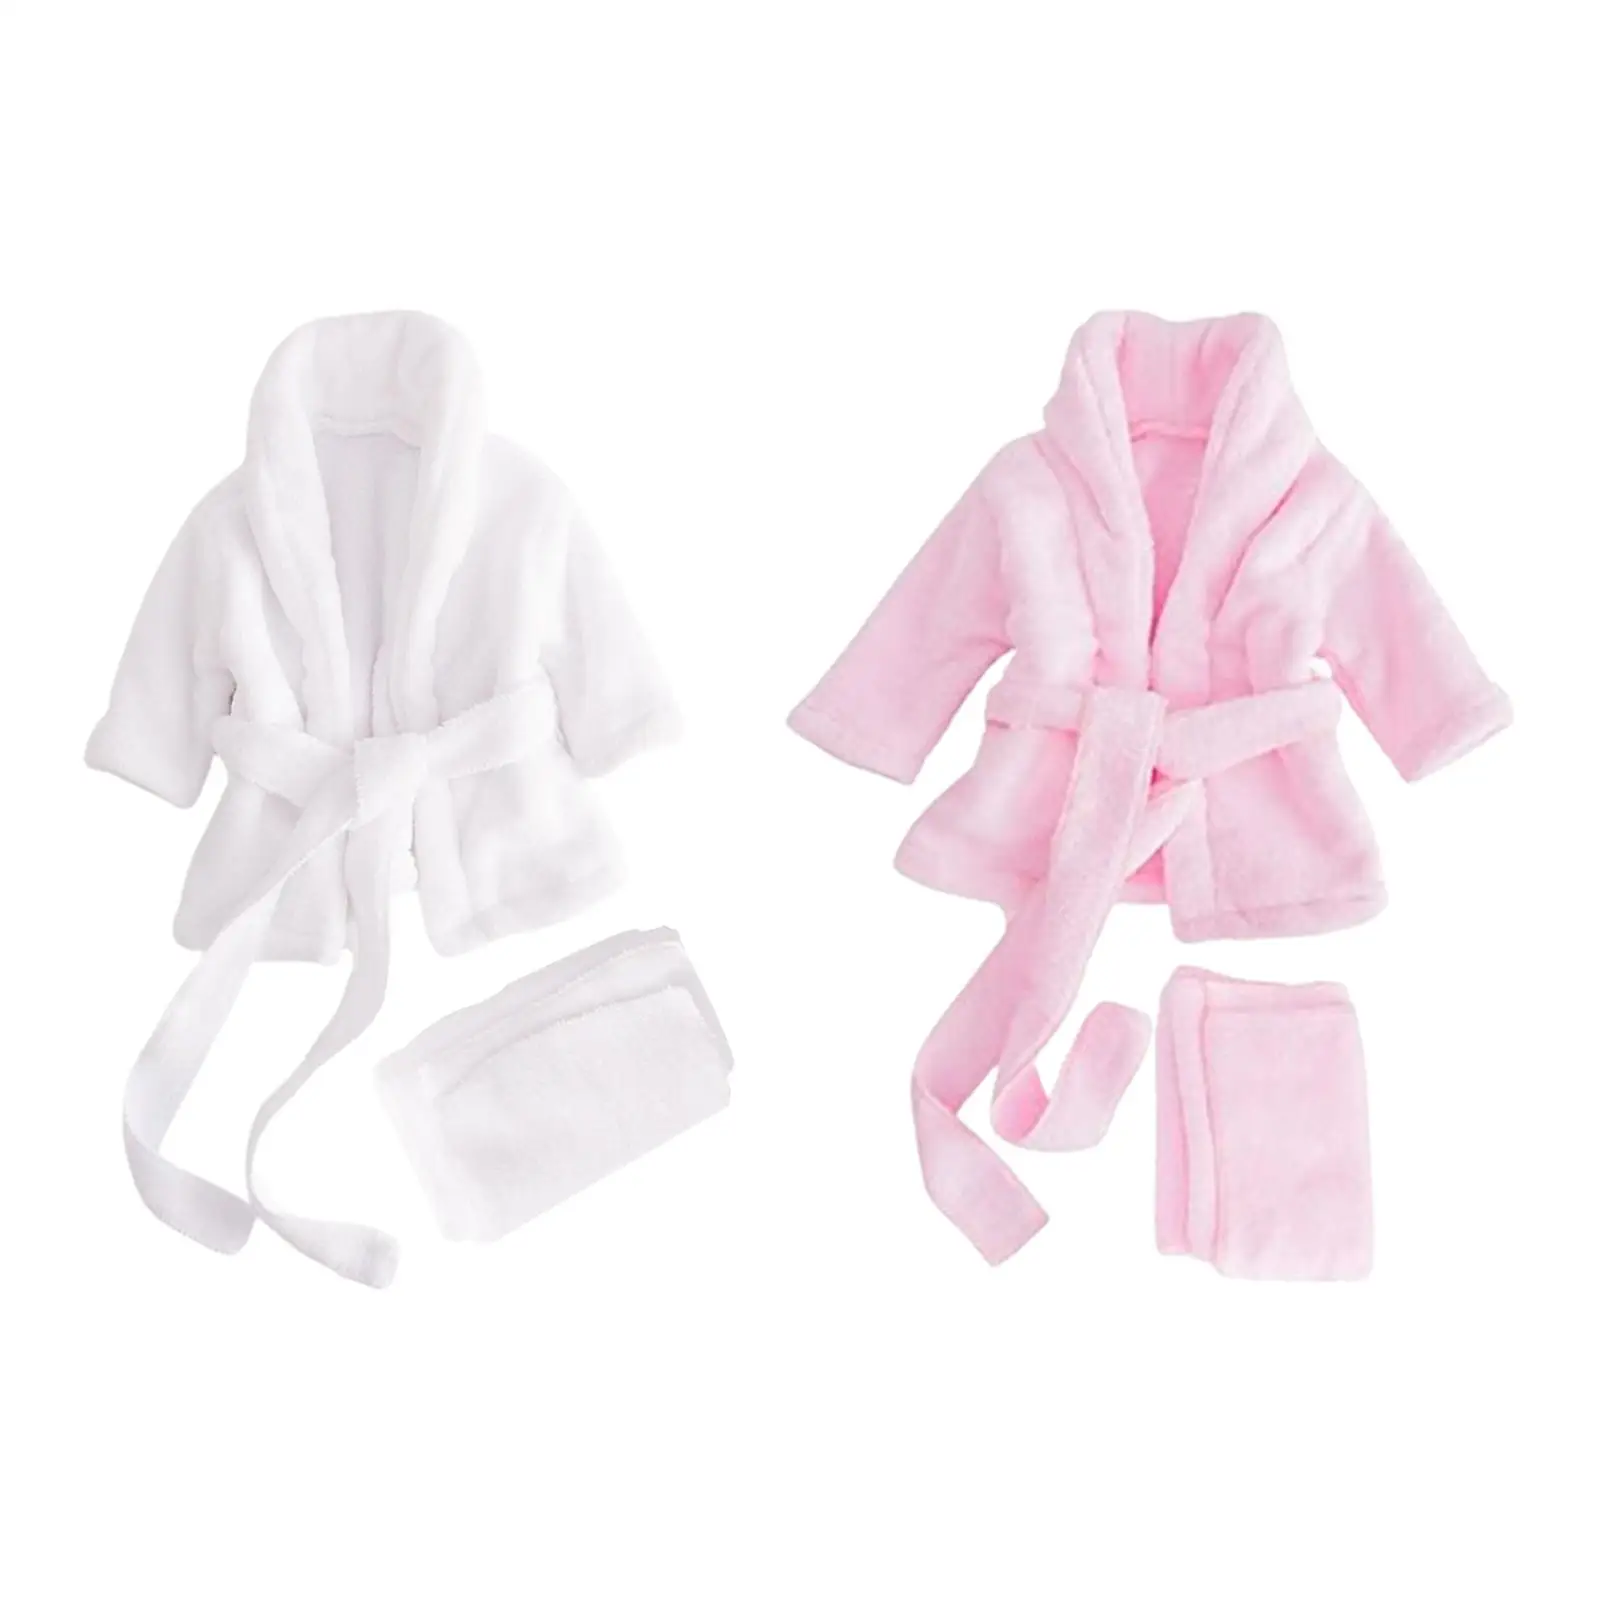 Baby Photography Prop Bathrobe Outfits Photoshoot Prop for Infants Baby